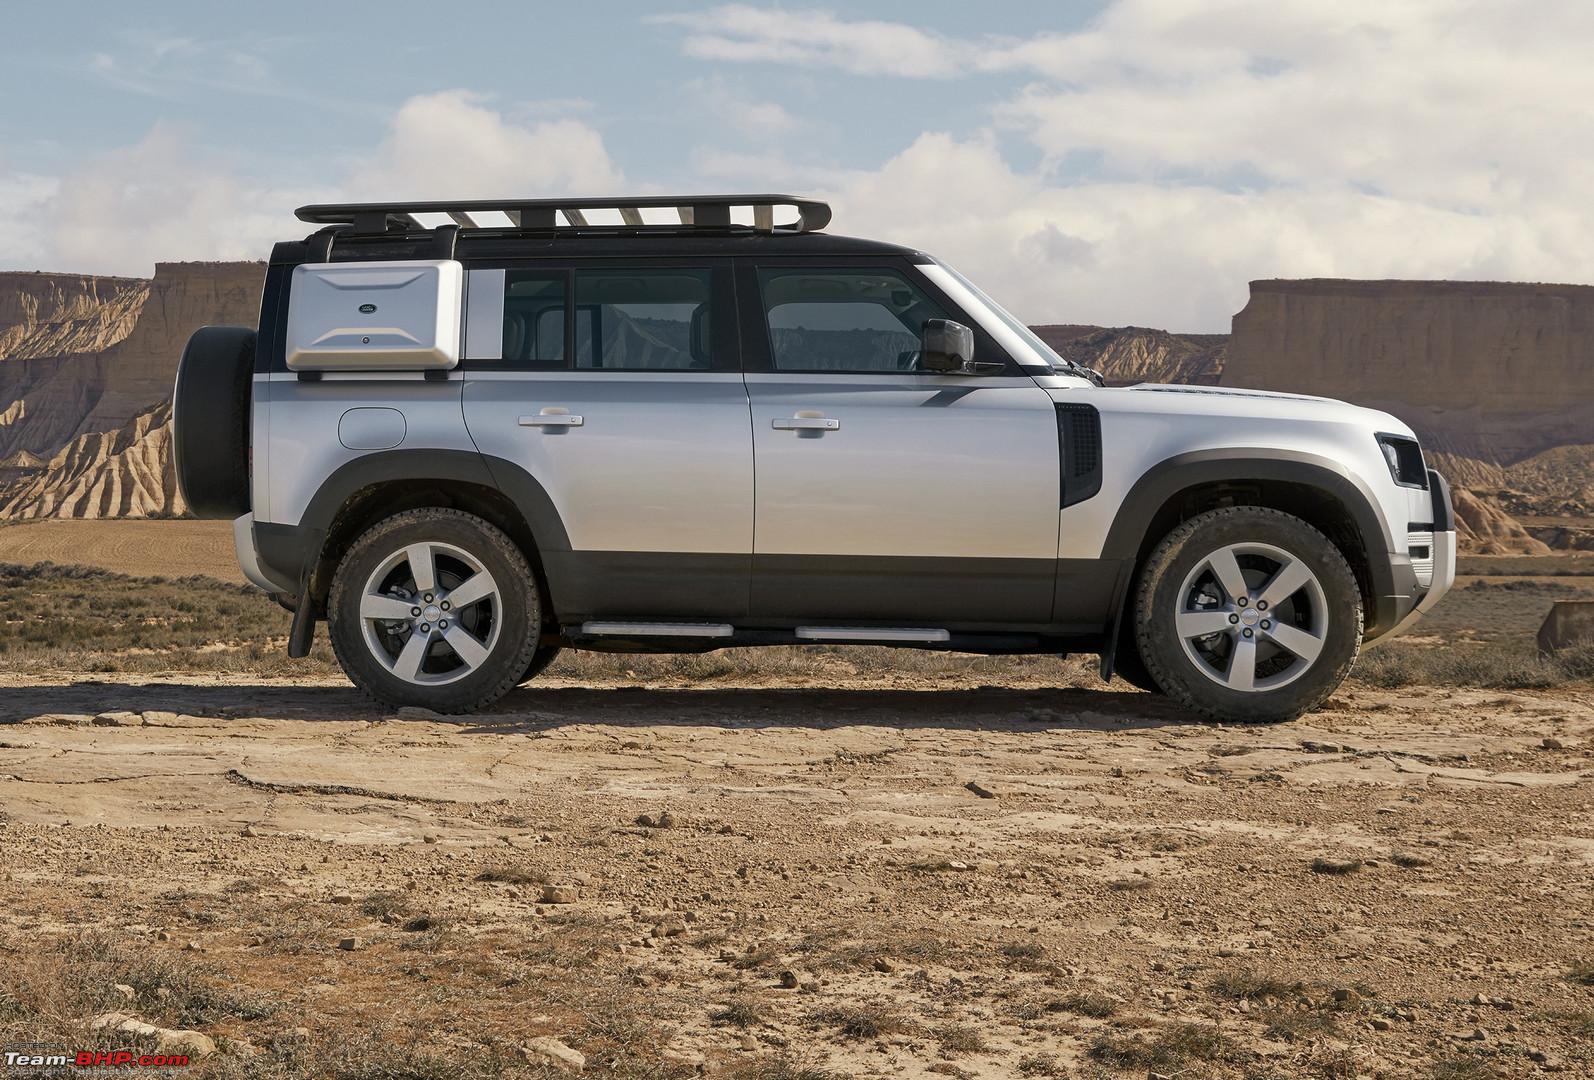 2023 Land Rover Defender 130 Has 8 Seats, More Space, Uglier Looks